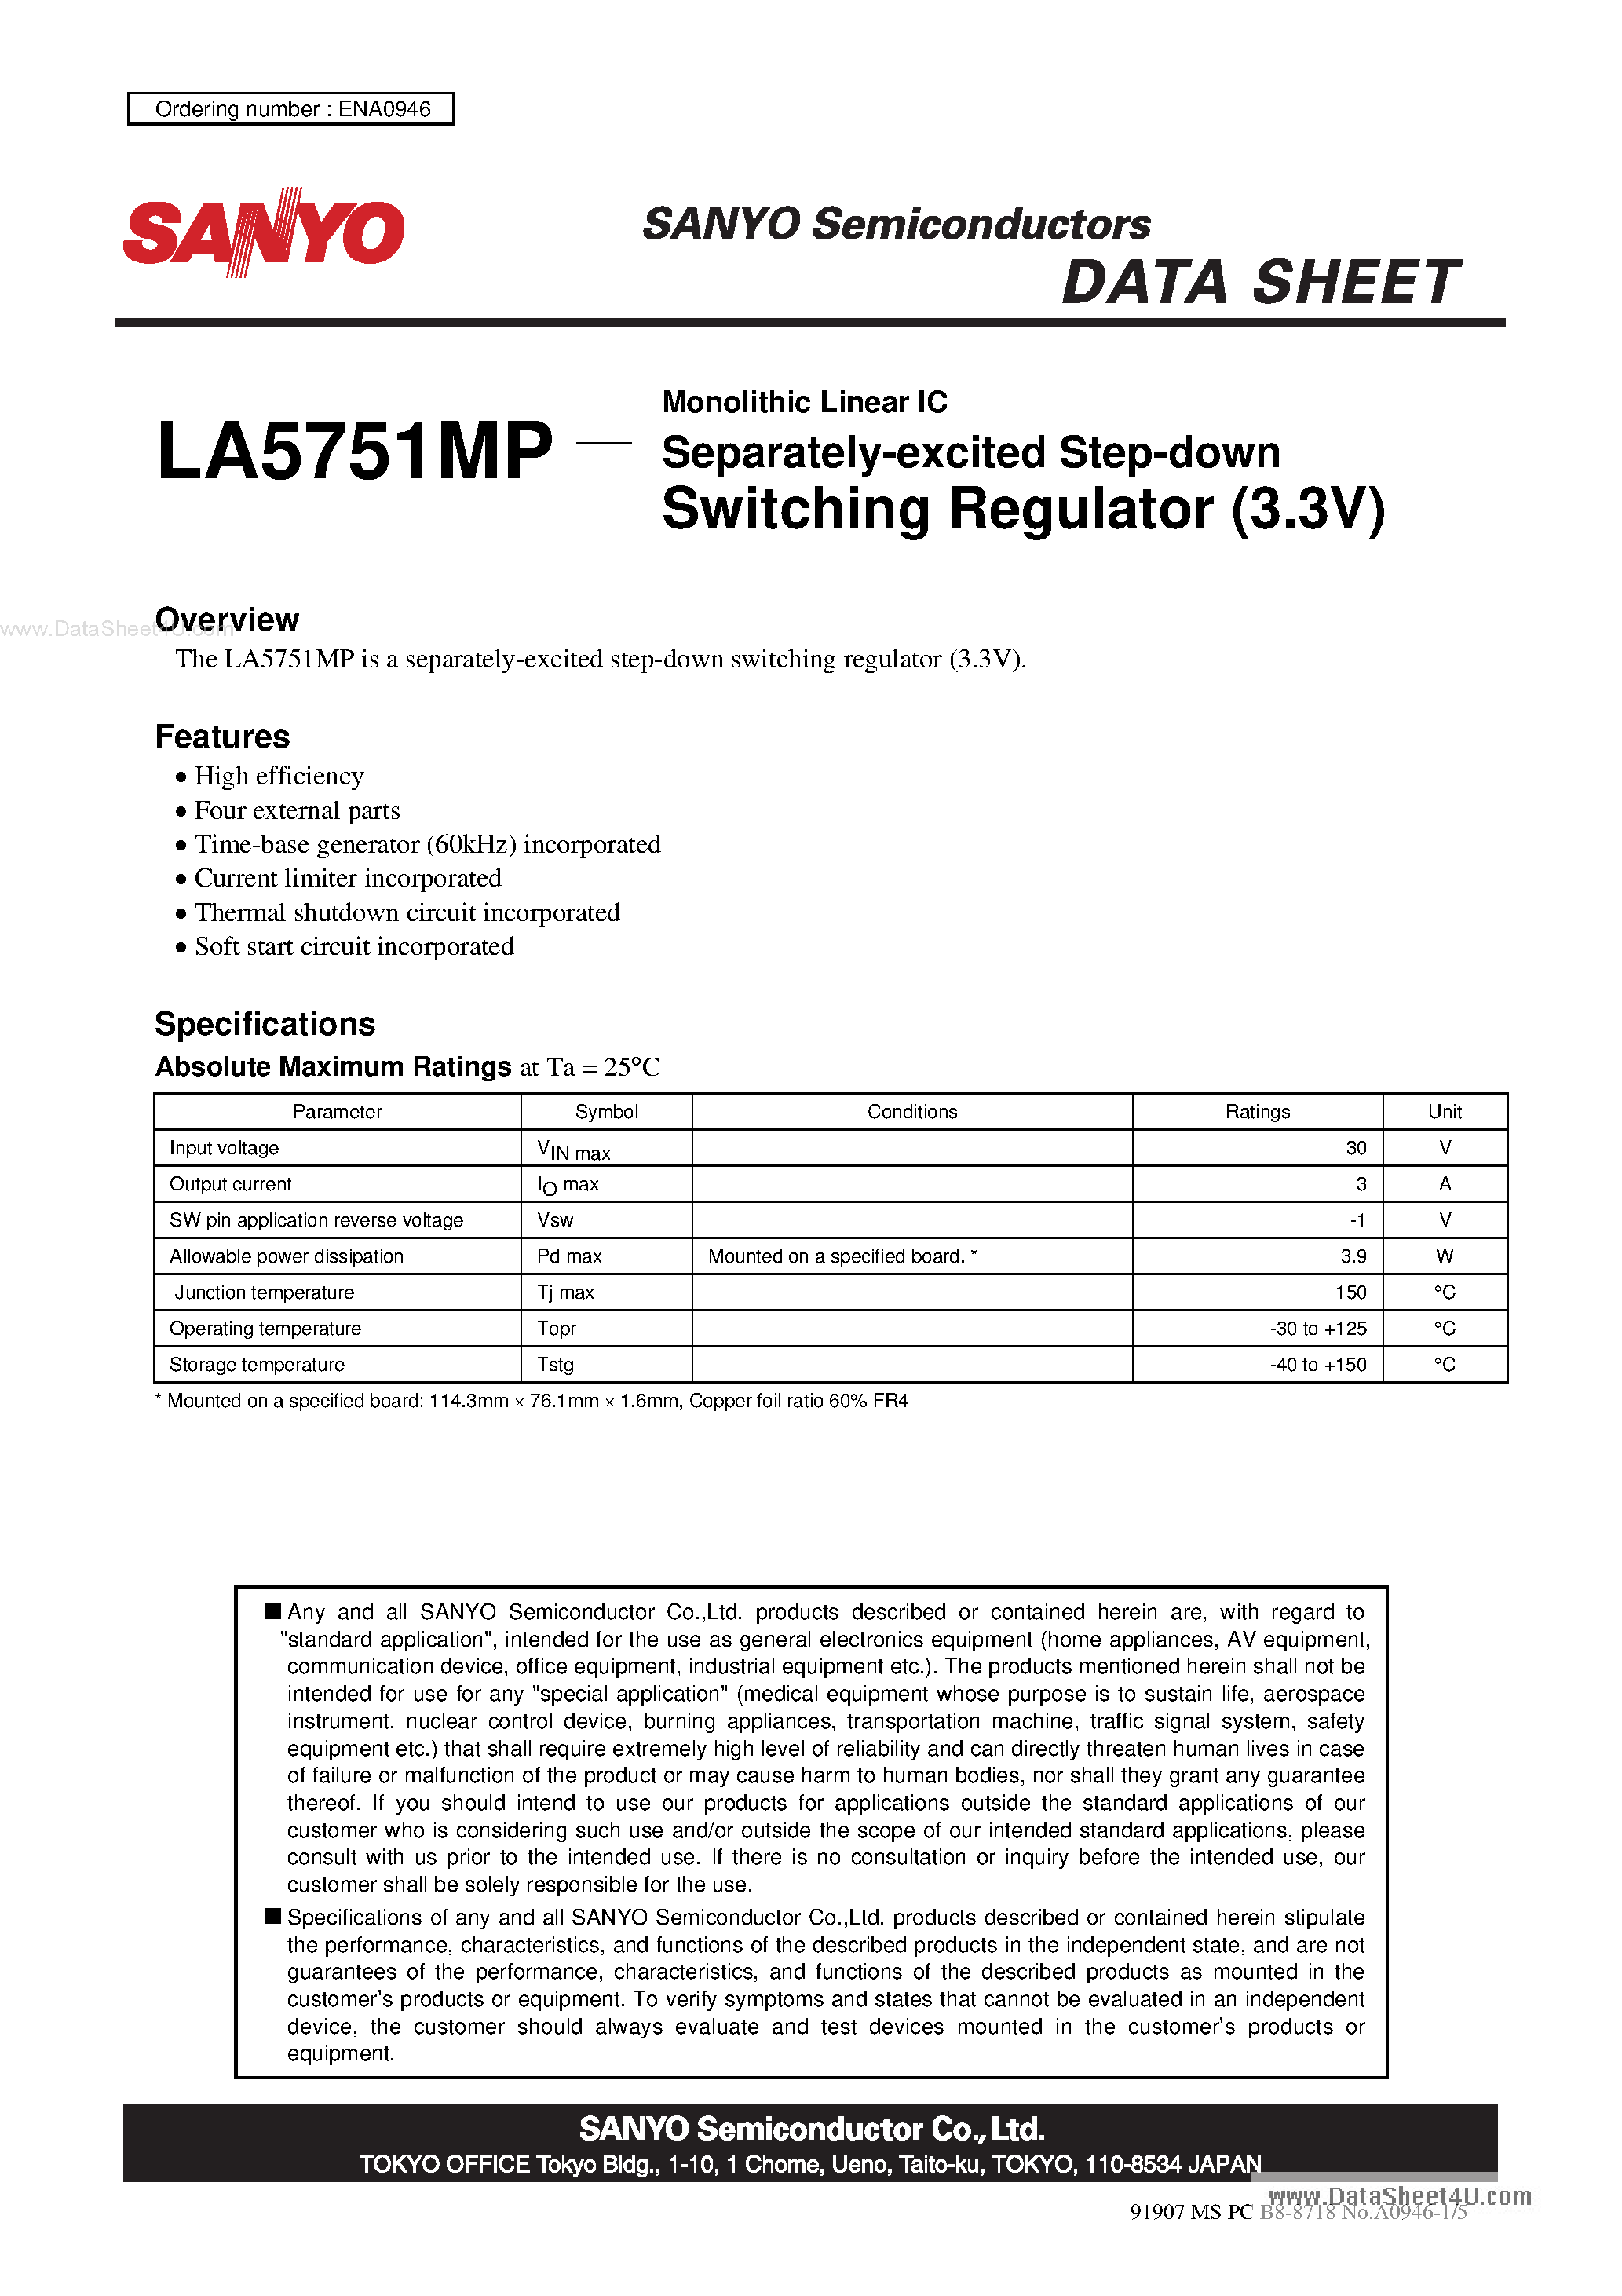 Даташит LA5751MP - Monolithic Linear IC Separately-Excited Step-Down Switching Regulator страница 1